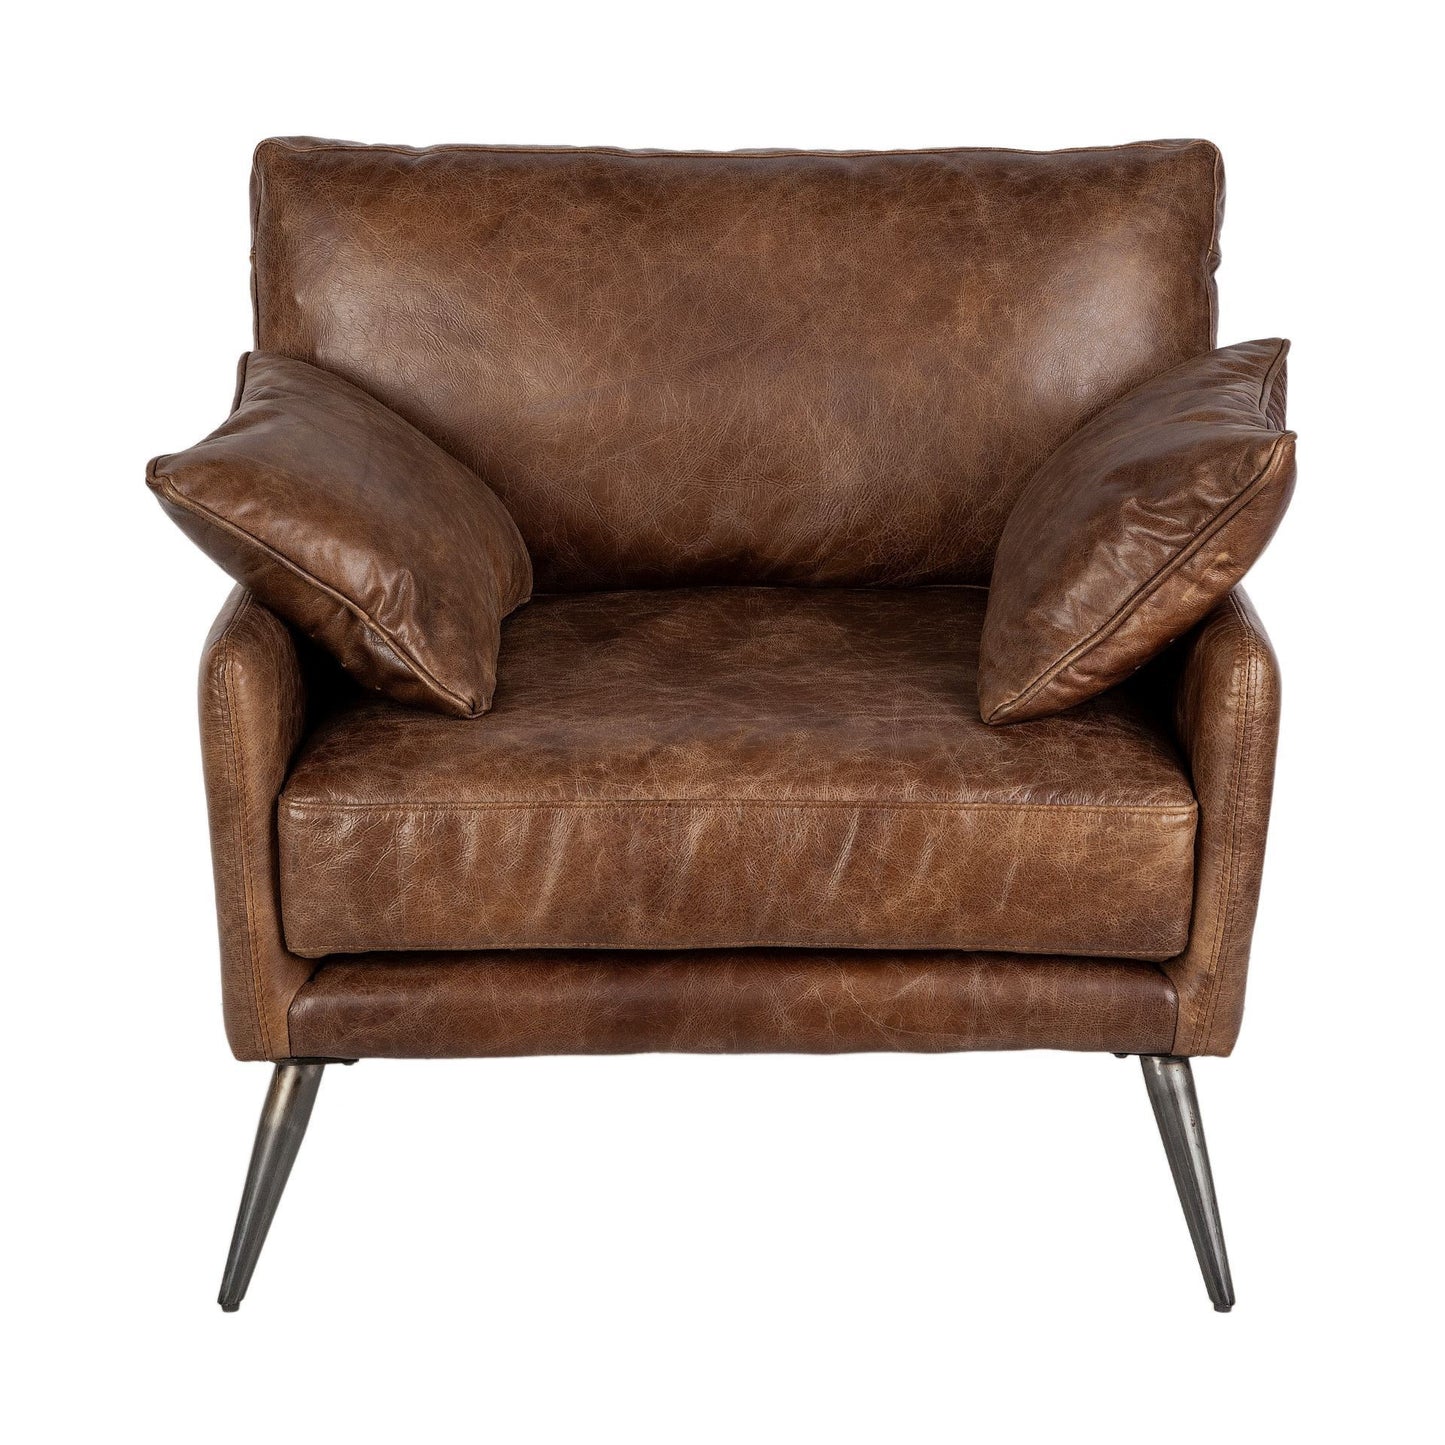 Espresso Brown Top-Grain Leather Wide Accent chair with Wooden Frame and Iron Legs By Homeroots